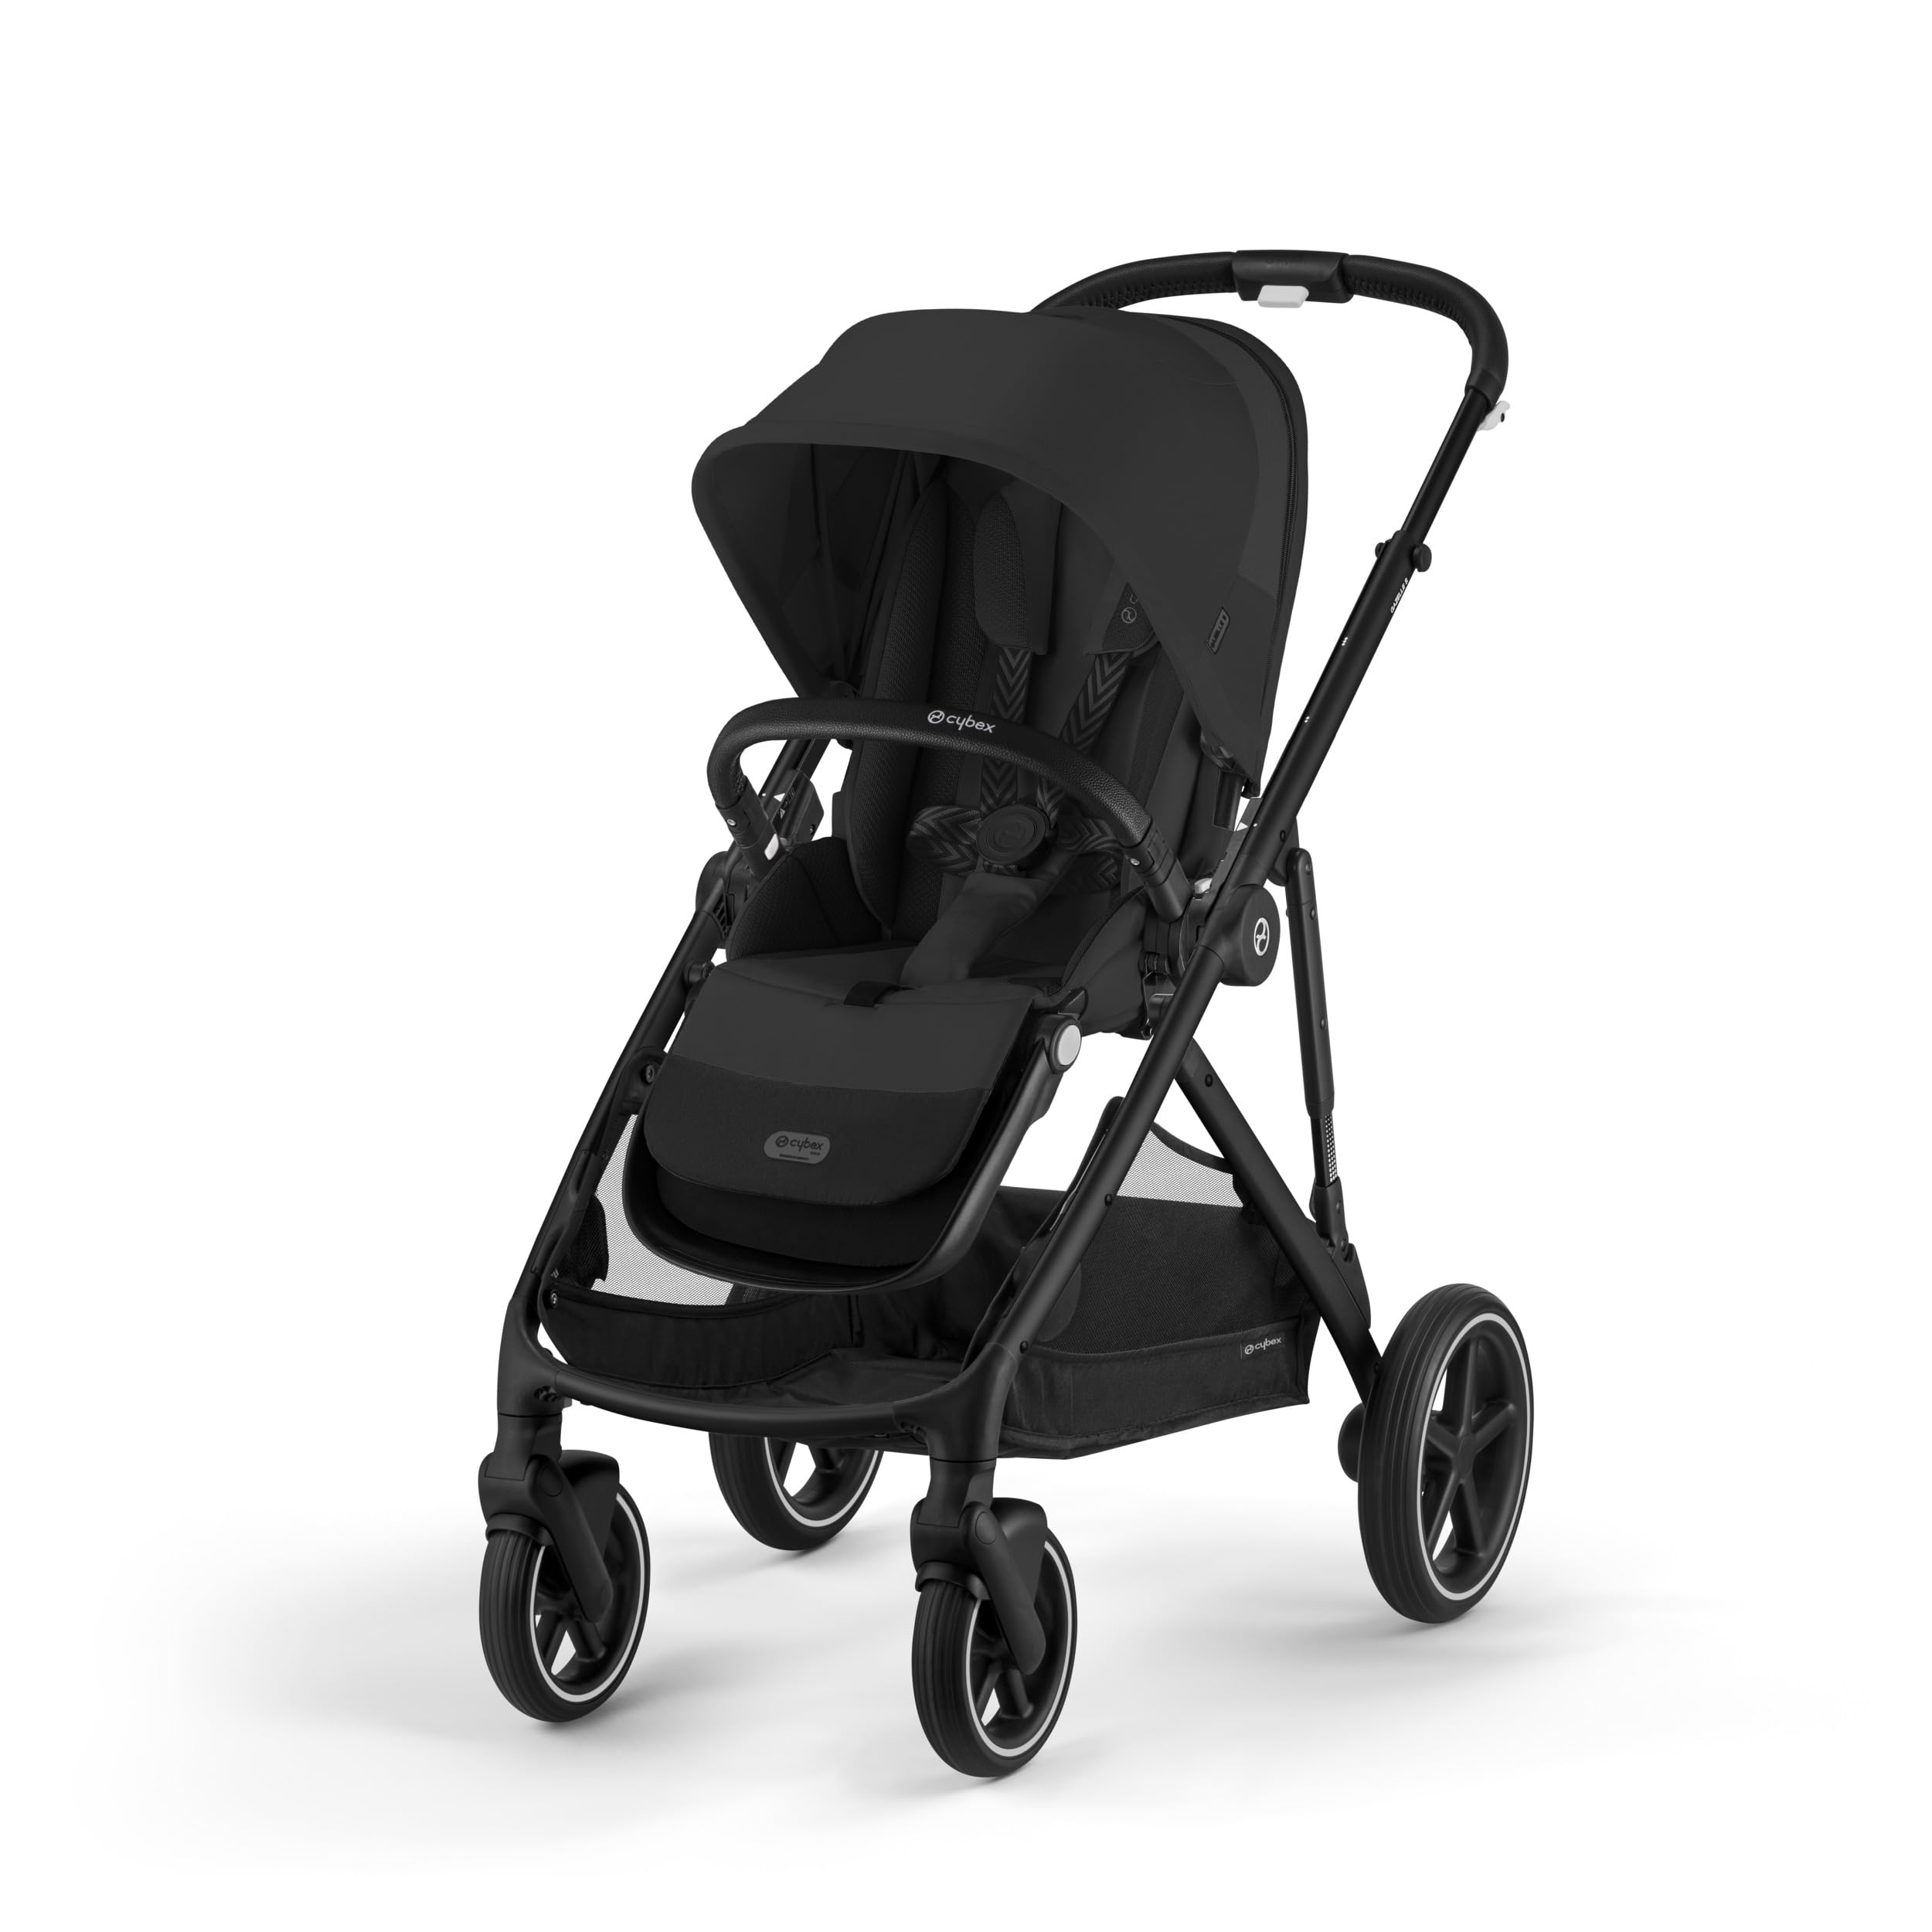 Cybex Gazelle S All-in-One Toddler and Baby Stroller with Over 20 Modular Configurations, Ergonomic Near-Flat Recline, Shopper Basket, and Compact Fold,Moon Black, Black Frame